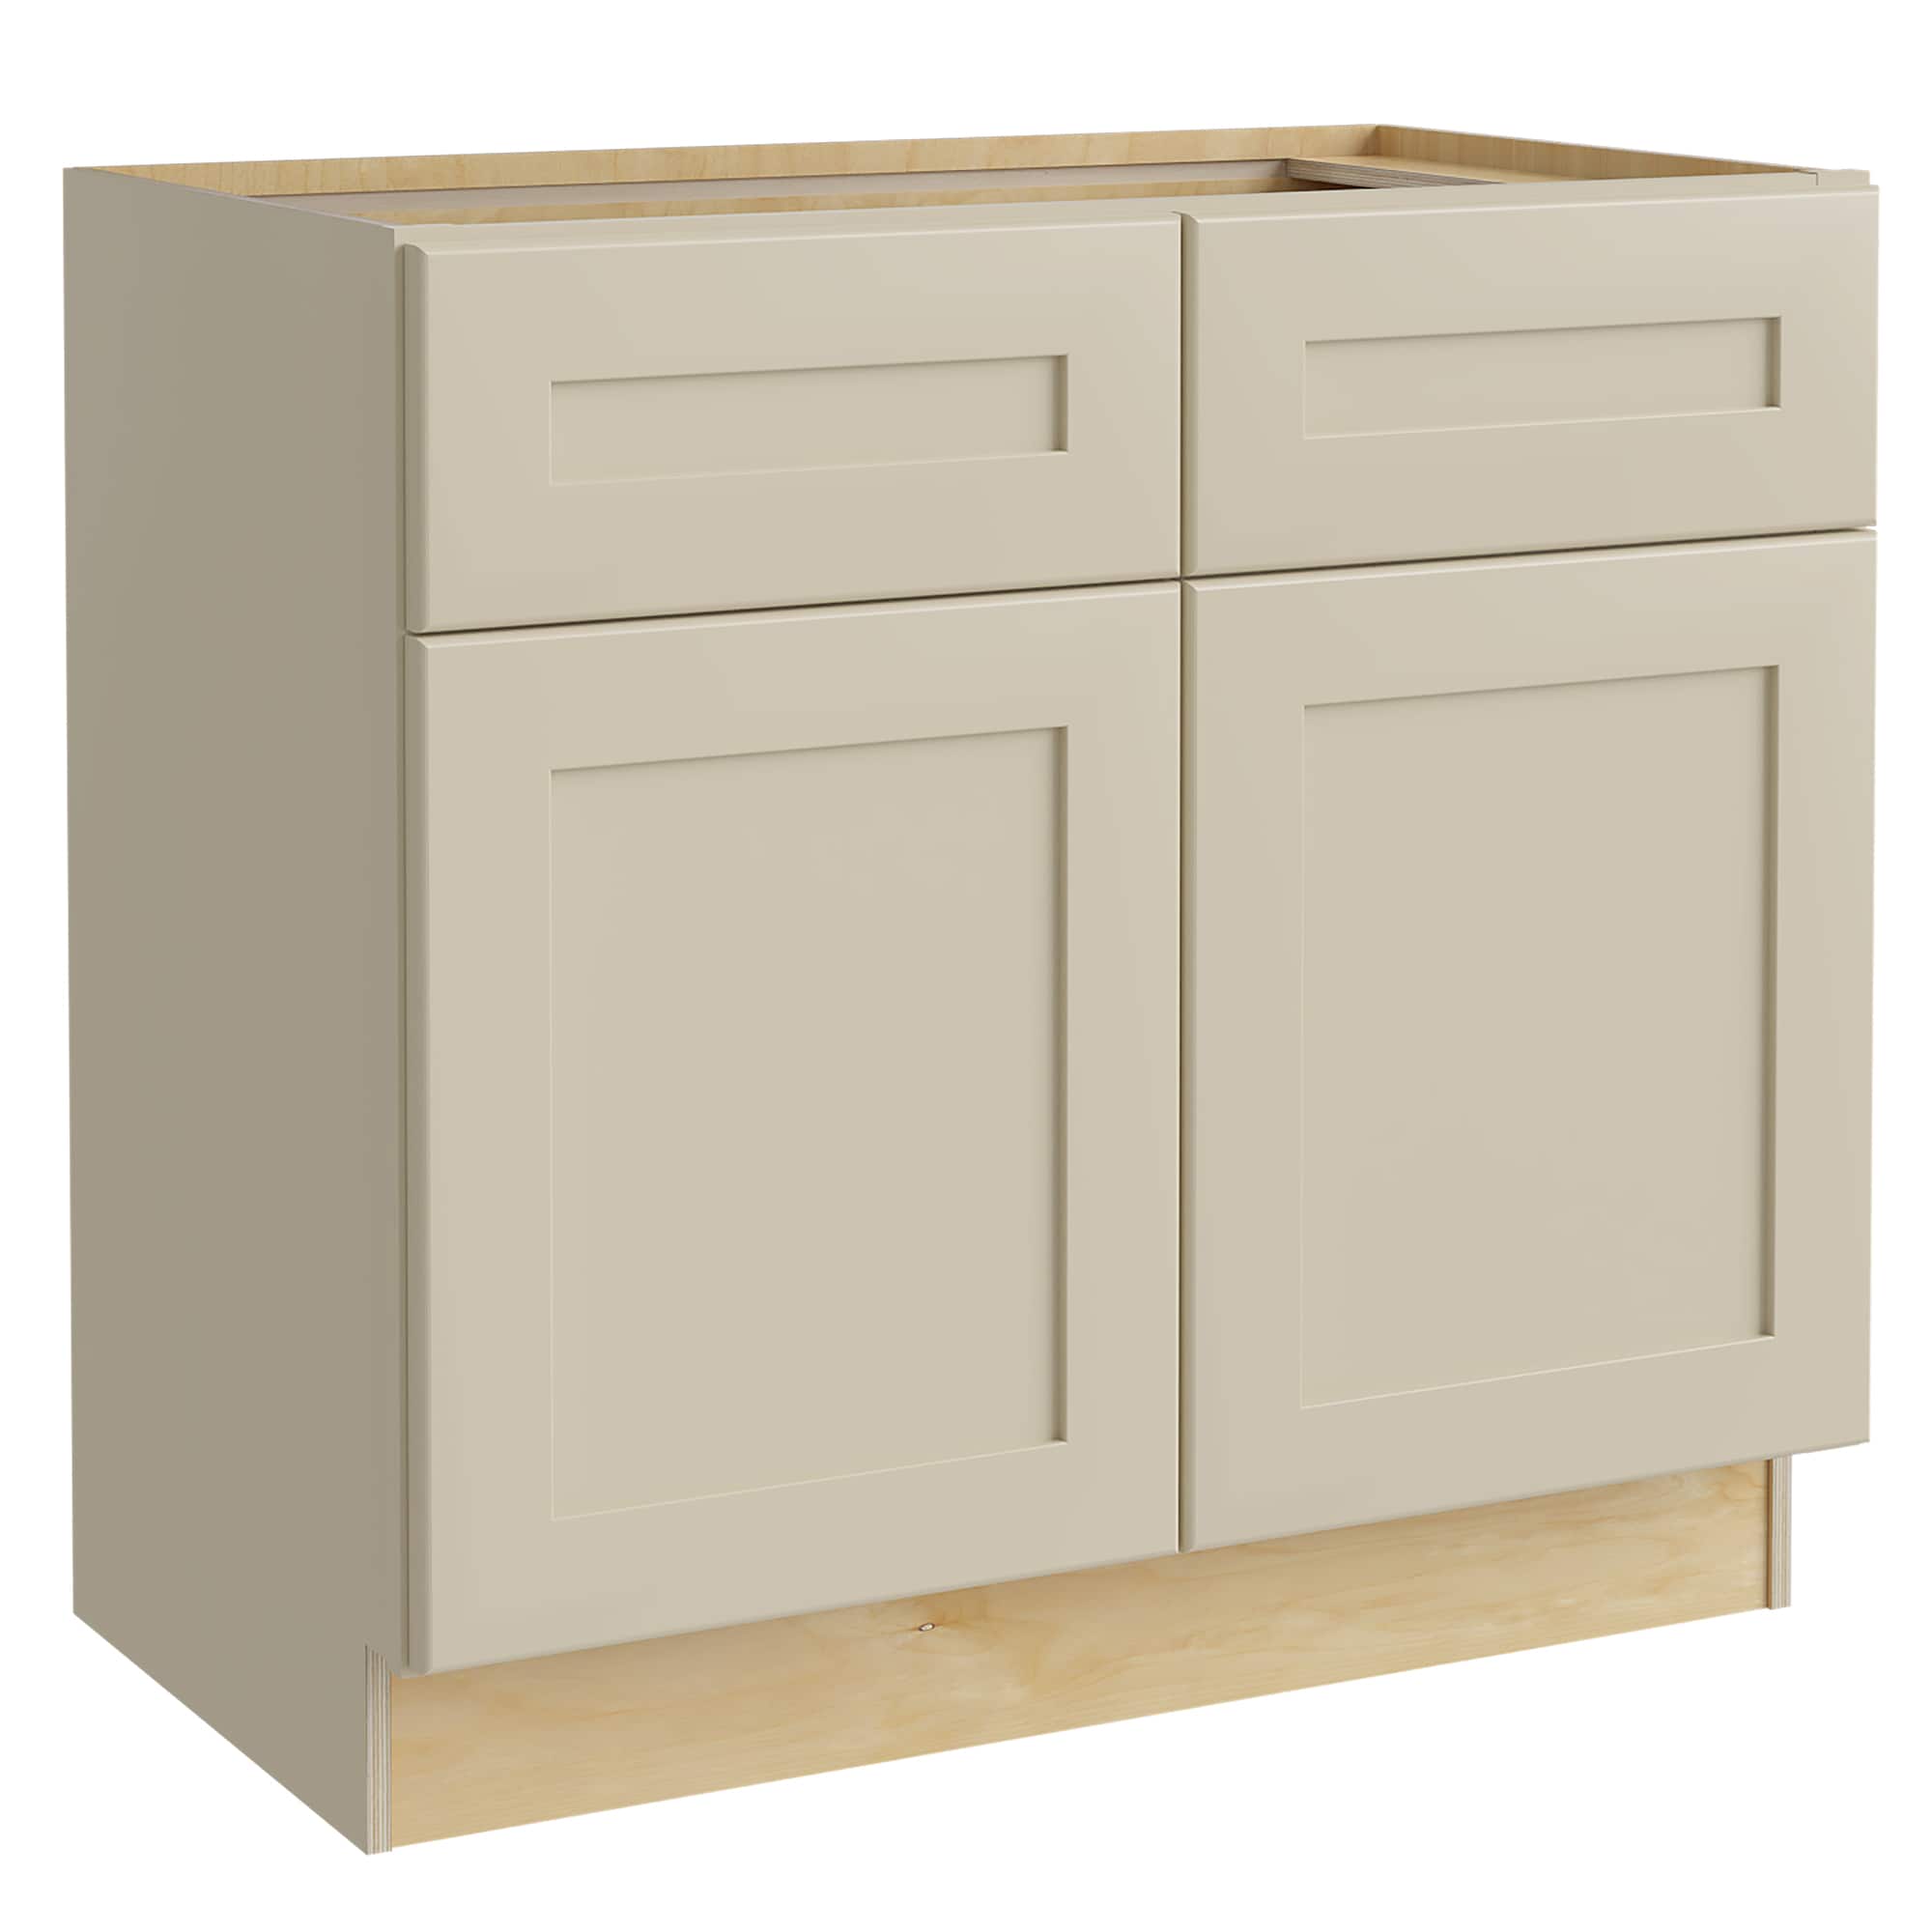 Luxxe Cabinetry 36-in W x 34.5-in H x 21-in D Norfolk Blended Cream Painted Drawer Base Fully Assembled Semi-custom Cabinet in Off-White | VB3621-NBC